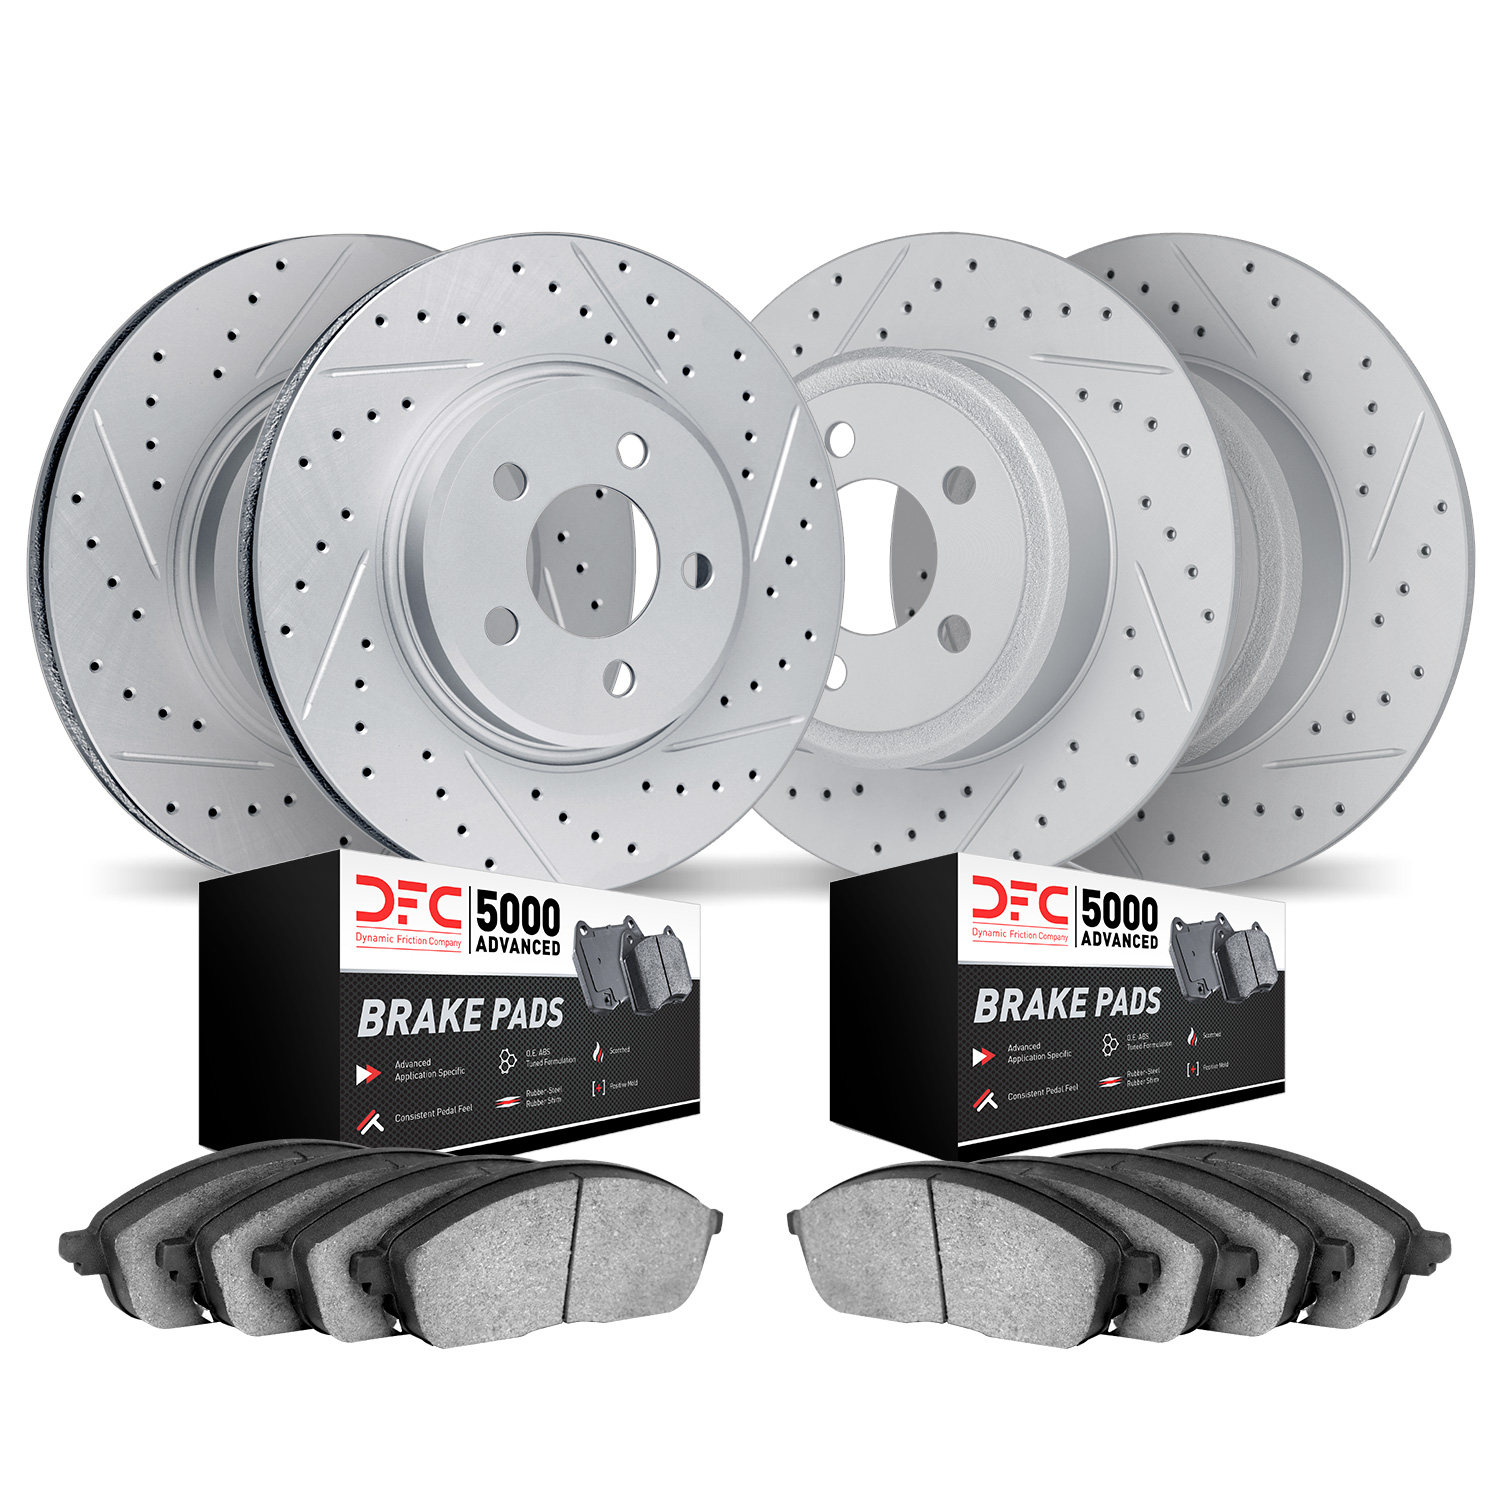 2504-74026 Geoperformance Drilled/Slotted Rotors w/5000 Advanced Brake Pads Kit, 2005-2010 Audi/Volkswagen, Position: Front and